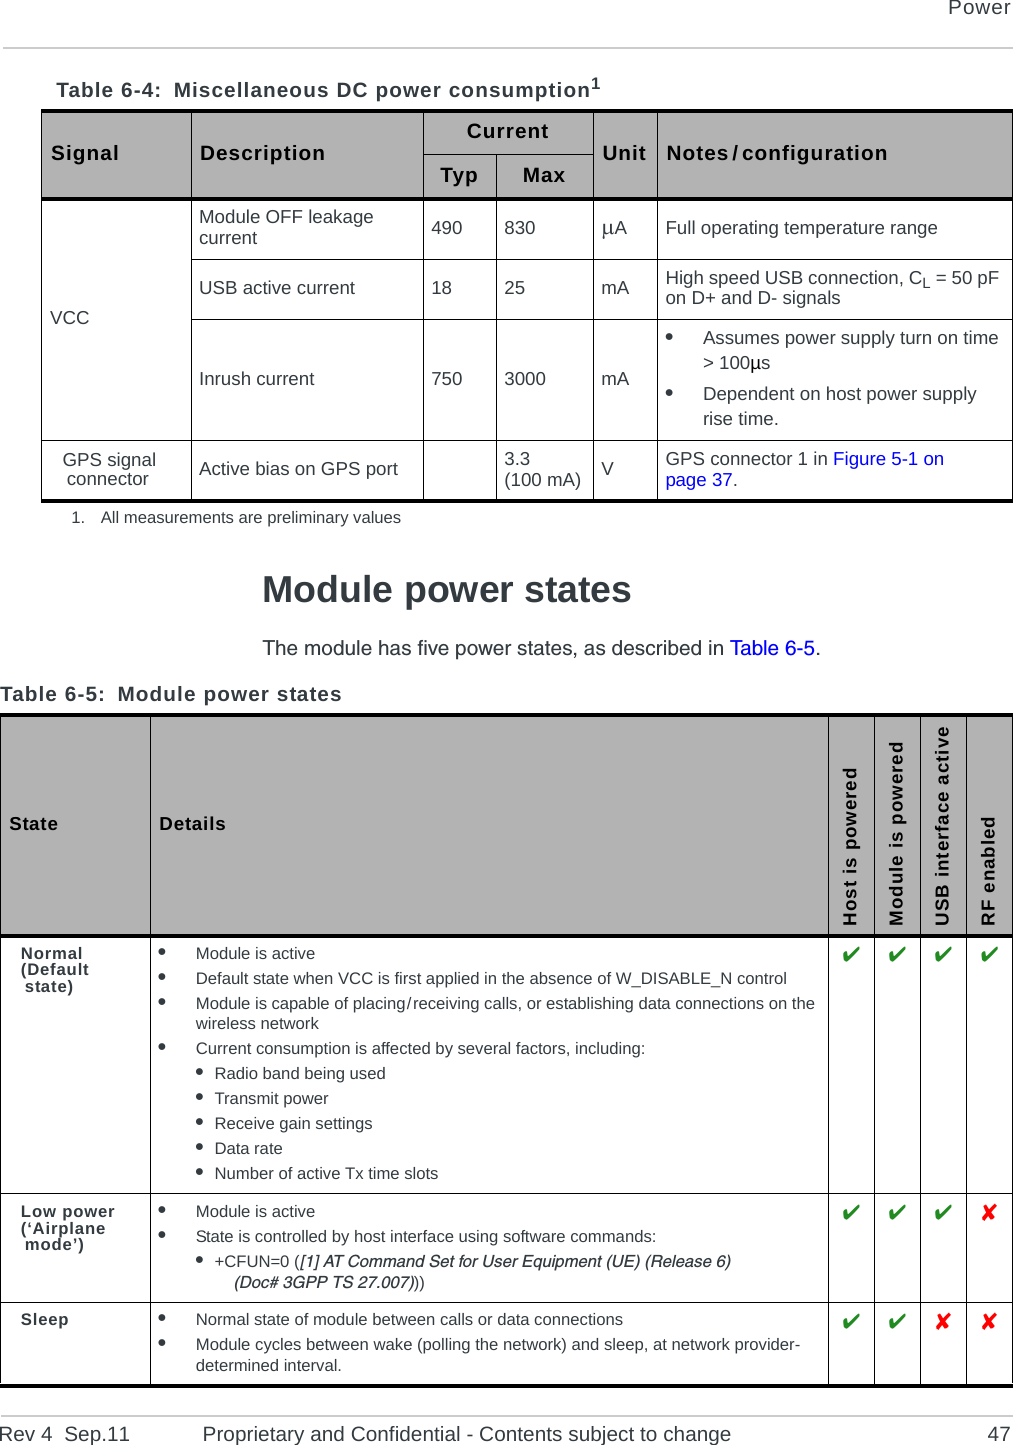 PowerRev 4  Sep.11 Proprietary and Confidential - Contents subject to change 47Module power statesThe module has five power states, as described in Ta b l e  6-5. Table 6-4: Miscellaneous DC power consumption1 Signal Description Current Unit Notes / configurationTyp MaxVCCModule OFF leakage current 490 830 AFull operating temperature rangeUSB active current  18 25 mA High speed USB connection, CL = 50 pF on D+ and D- signalsInrush current 750 3000 mA•Assumes power supply turn on time &gt; 100µs•Dependent on host power supply rise time.GPS signal connector Active bias on GPS port  3.3 (100 mA) VGPS connector 1 in Figure 5-1 on page 37.1. All measurements are preliminary valuesTable 6-5: Module power states State DetailsHost is poweredModule is poweredUSB interface activeRF enabledNormal(Default state)•Module is active•Default state when VCC is first applied in the absence of W_DISABLE_N control•Module is capable of placing / receiving calls, or establishing data connections on the wireless network•Current consumption is affected by several factors, including:•Radio band being used•Transmit power•Receive gain settings•Data rate•Number of active Tx time slots   Low power(‘Airplane mode’)•Module is active•State is controlled by host interface using software commands:•+CFUN=0 ([1] AT Command Set for User Equipment (UE) (Release 6) (Doc# 3GPP TS 27.007)))   Sleep •Normal state of module between calls or data connections•Module cycles between wake (polling the network) and sleep, at network provider-determined interval.   